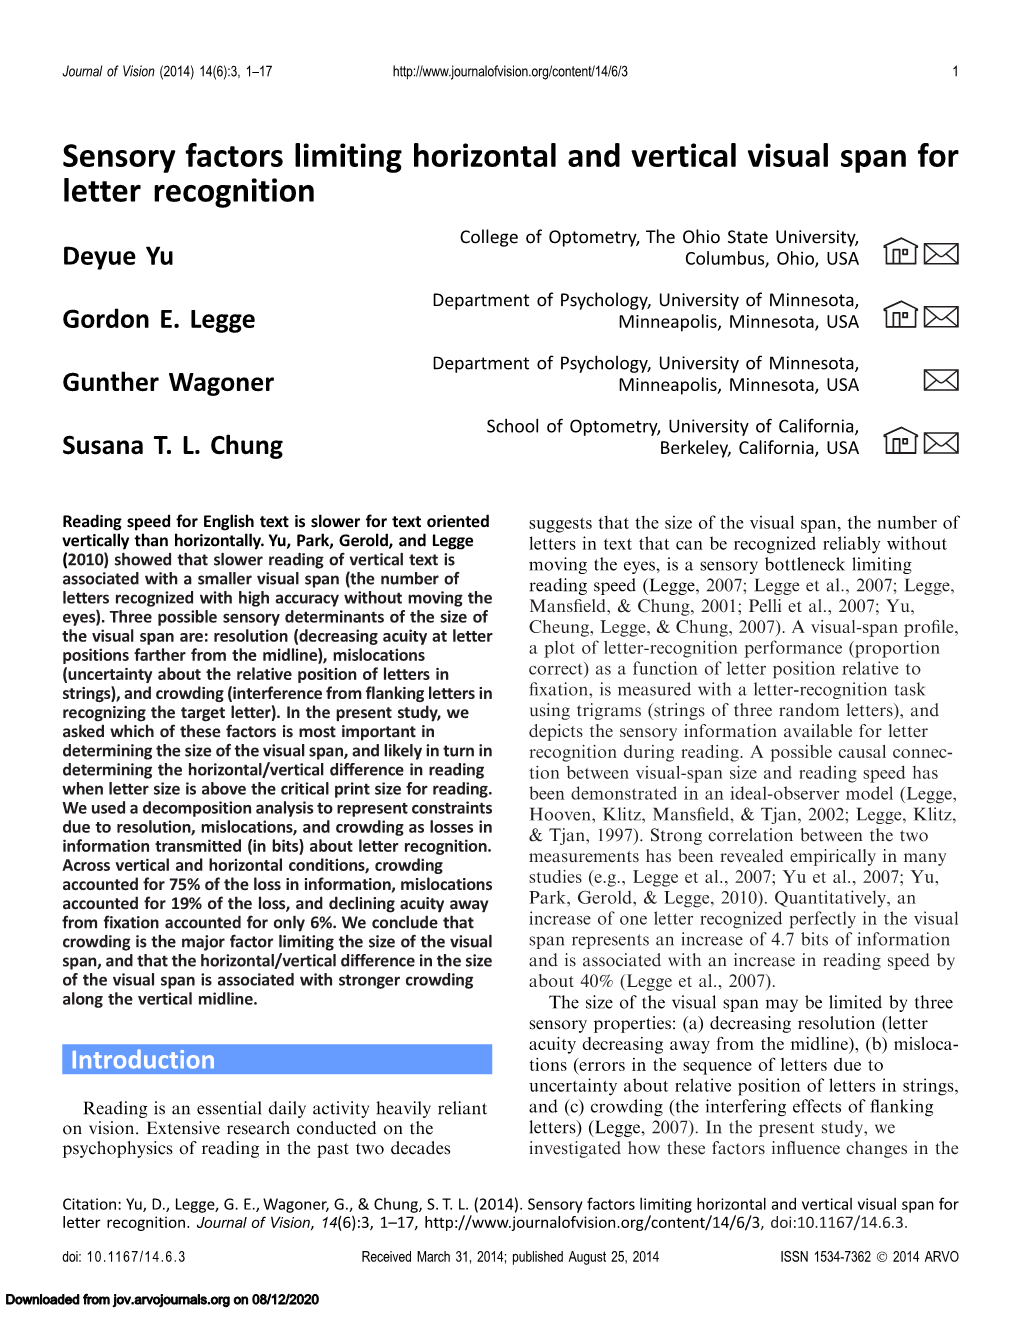 Sensory Factors Limiting Horizontal and Vertical Visual Span for Letter